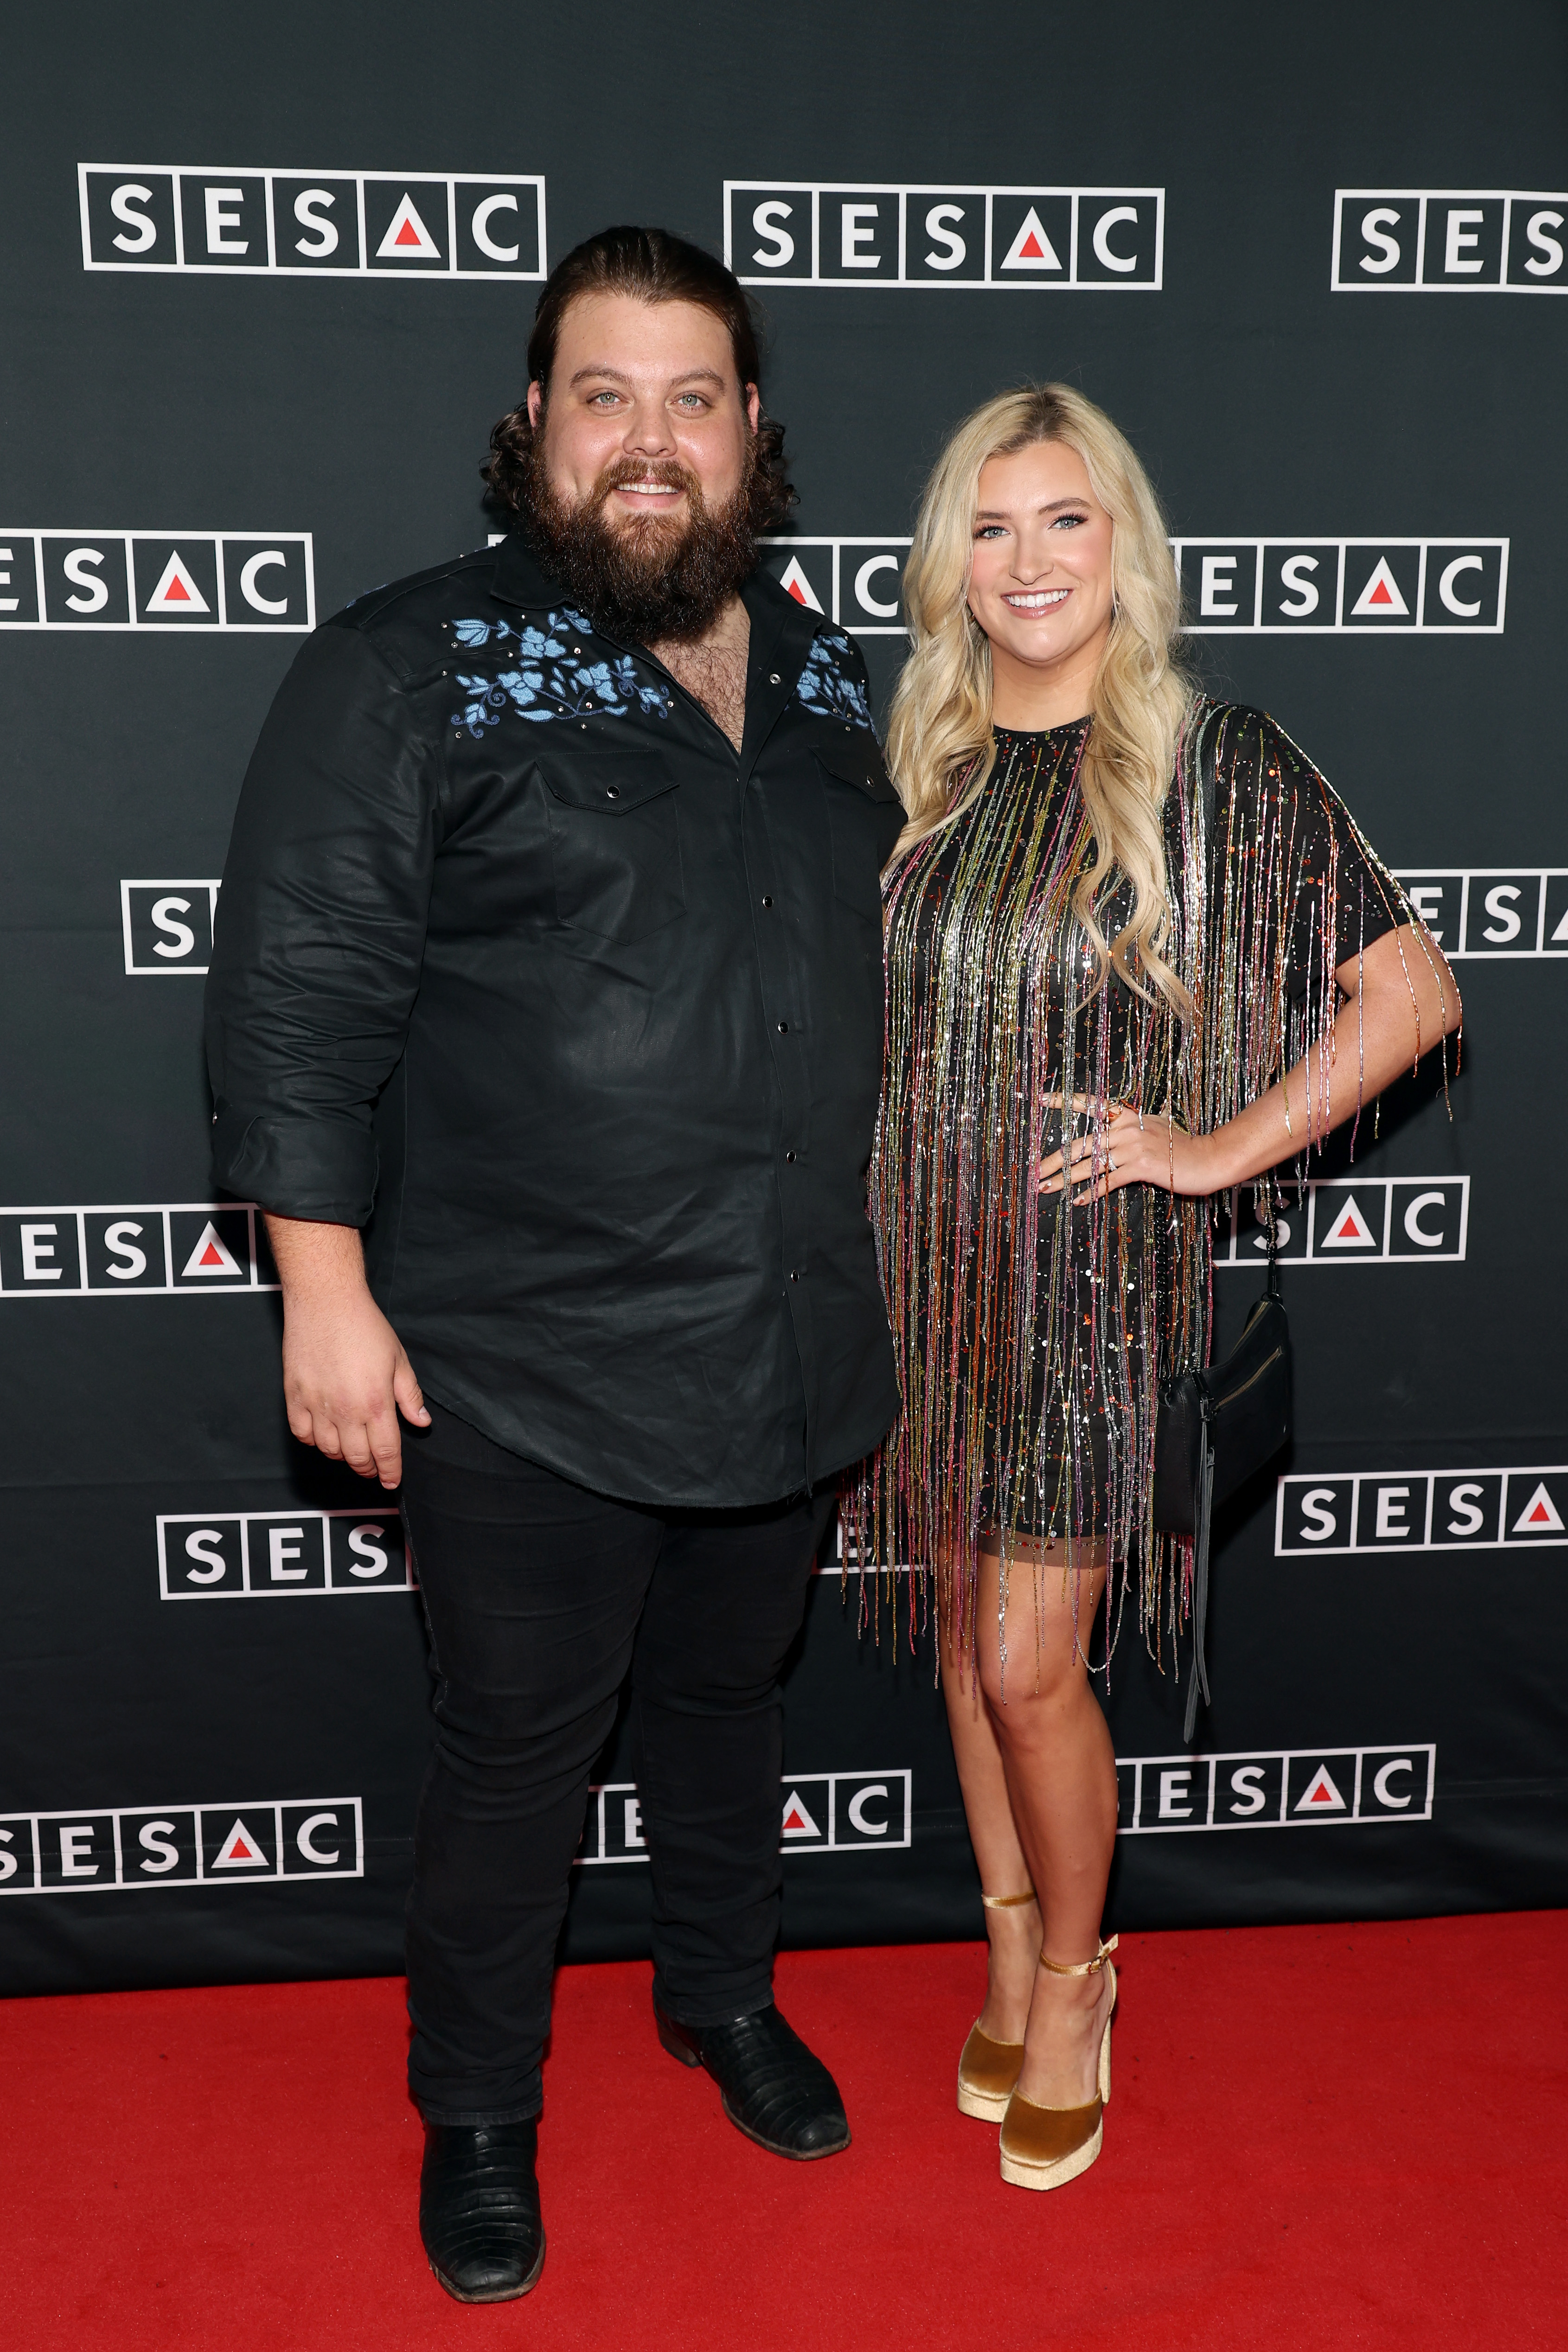 Dillon Carmichael and Shayla Whitson attend the 2022 SESAC Country Awards at Country Music Hall of Fame and Museum on November 6, 2022, in Nashville, Tennessee. | Source: Getty Images